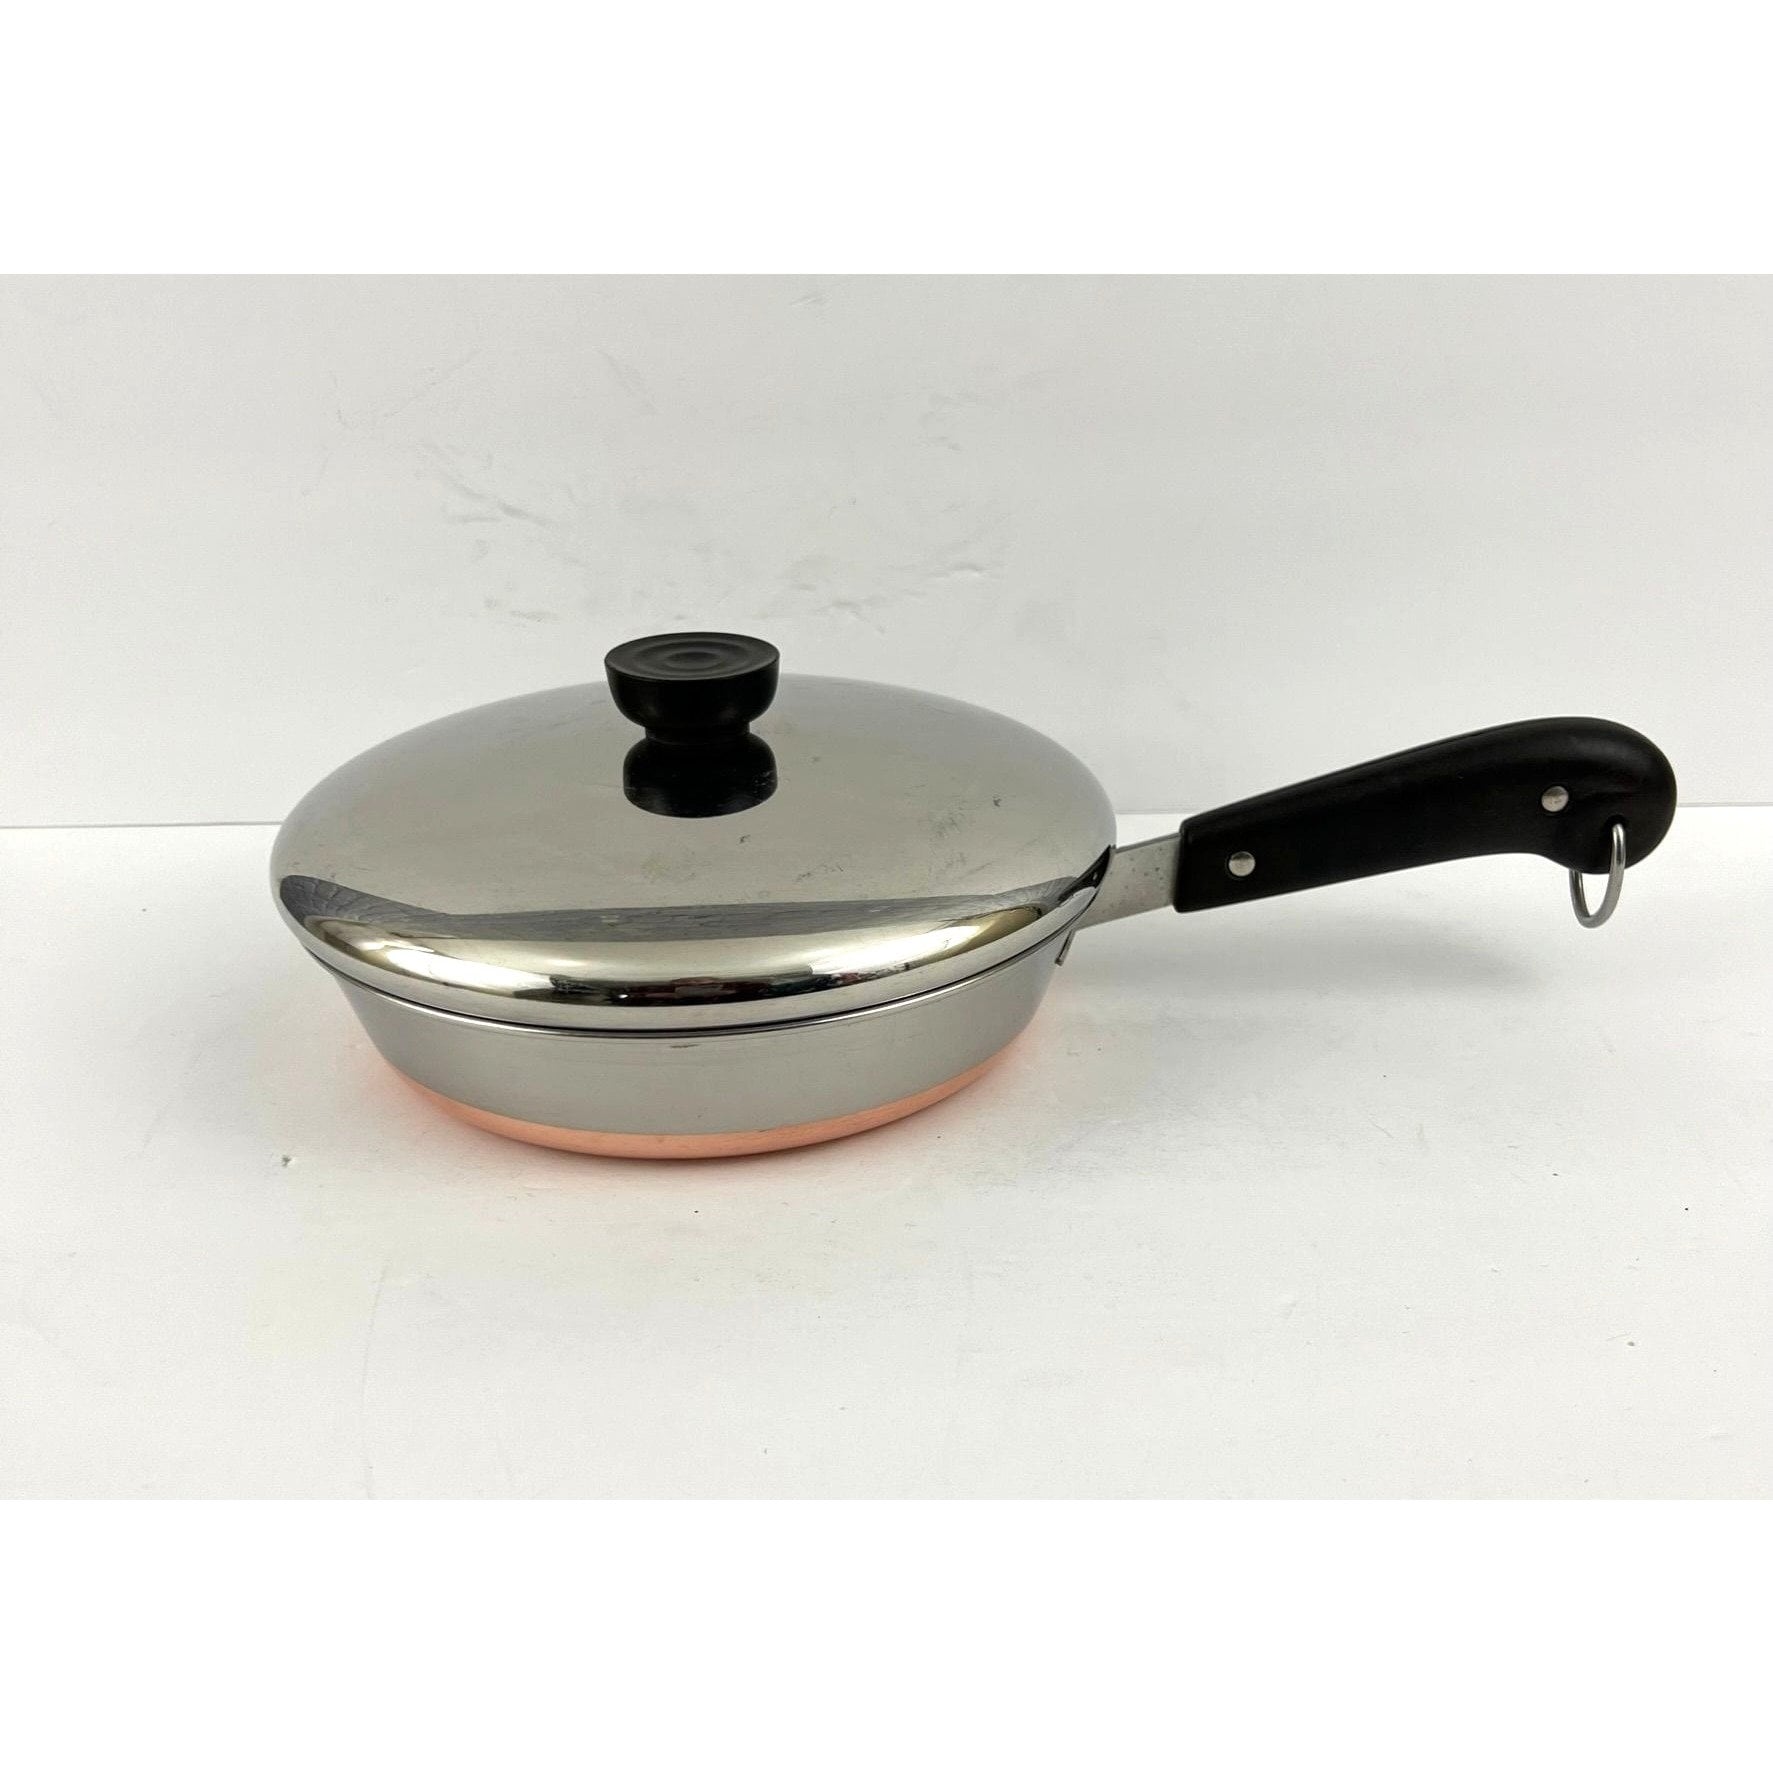 Chef's Classic 722-20 Open Skillet, 8 In Dia, Stainless Steel